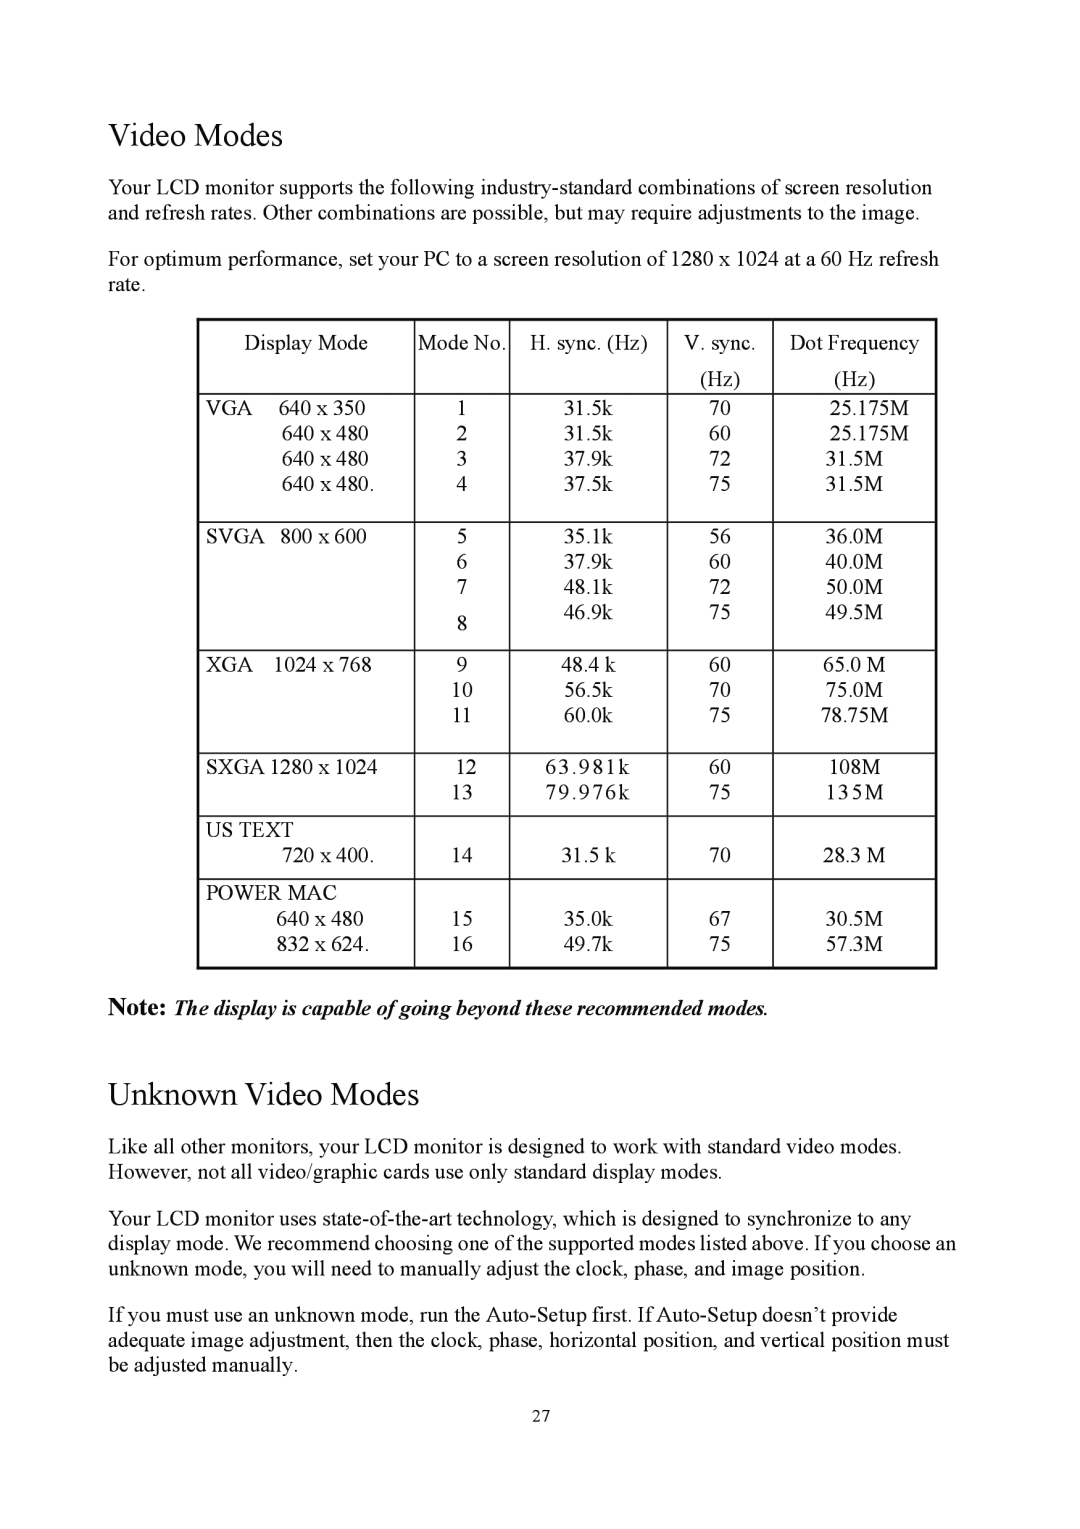 Planar PE1900 manual Unknown Video Modes, Note The display is capable of going beyond these recommended modes 